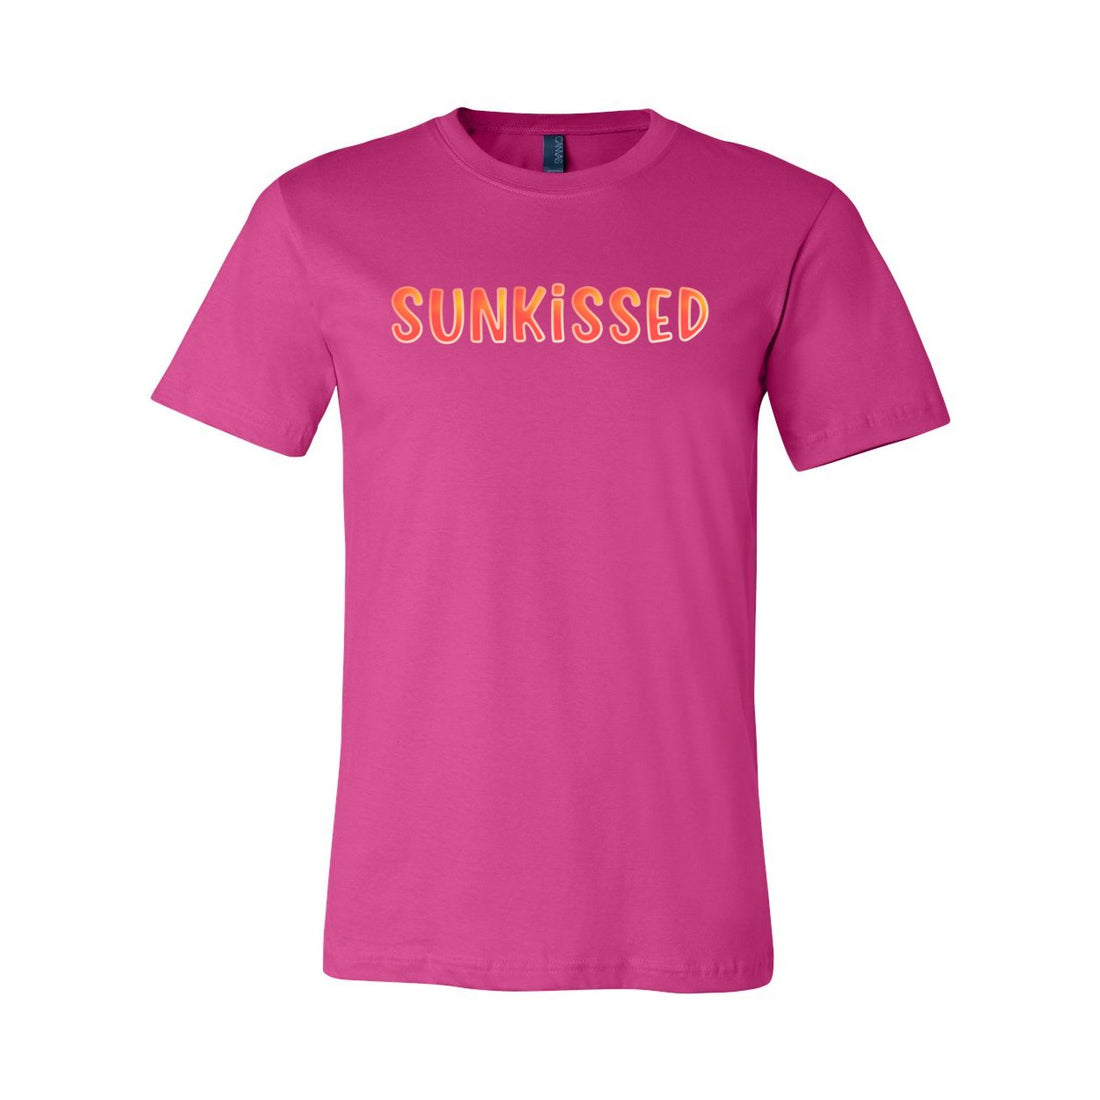 Sunkissed Short Sleeve Jersey Tee - T-Shirts - Positively Sassy - Sunkissed Short Sleeve Jersey Tee